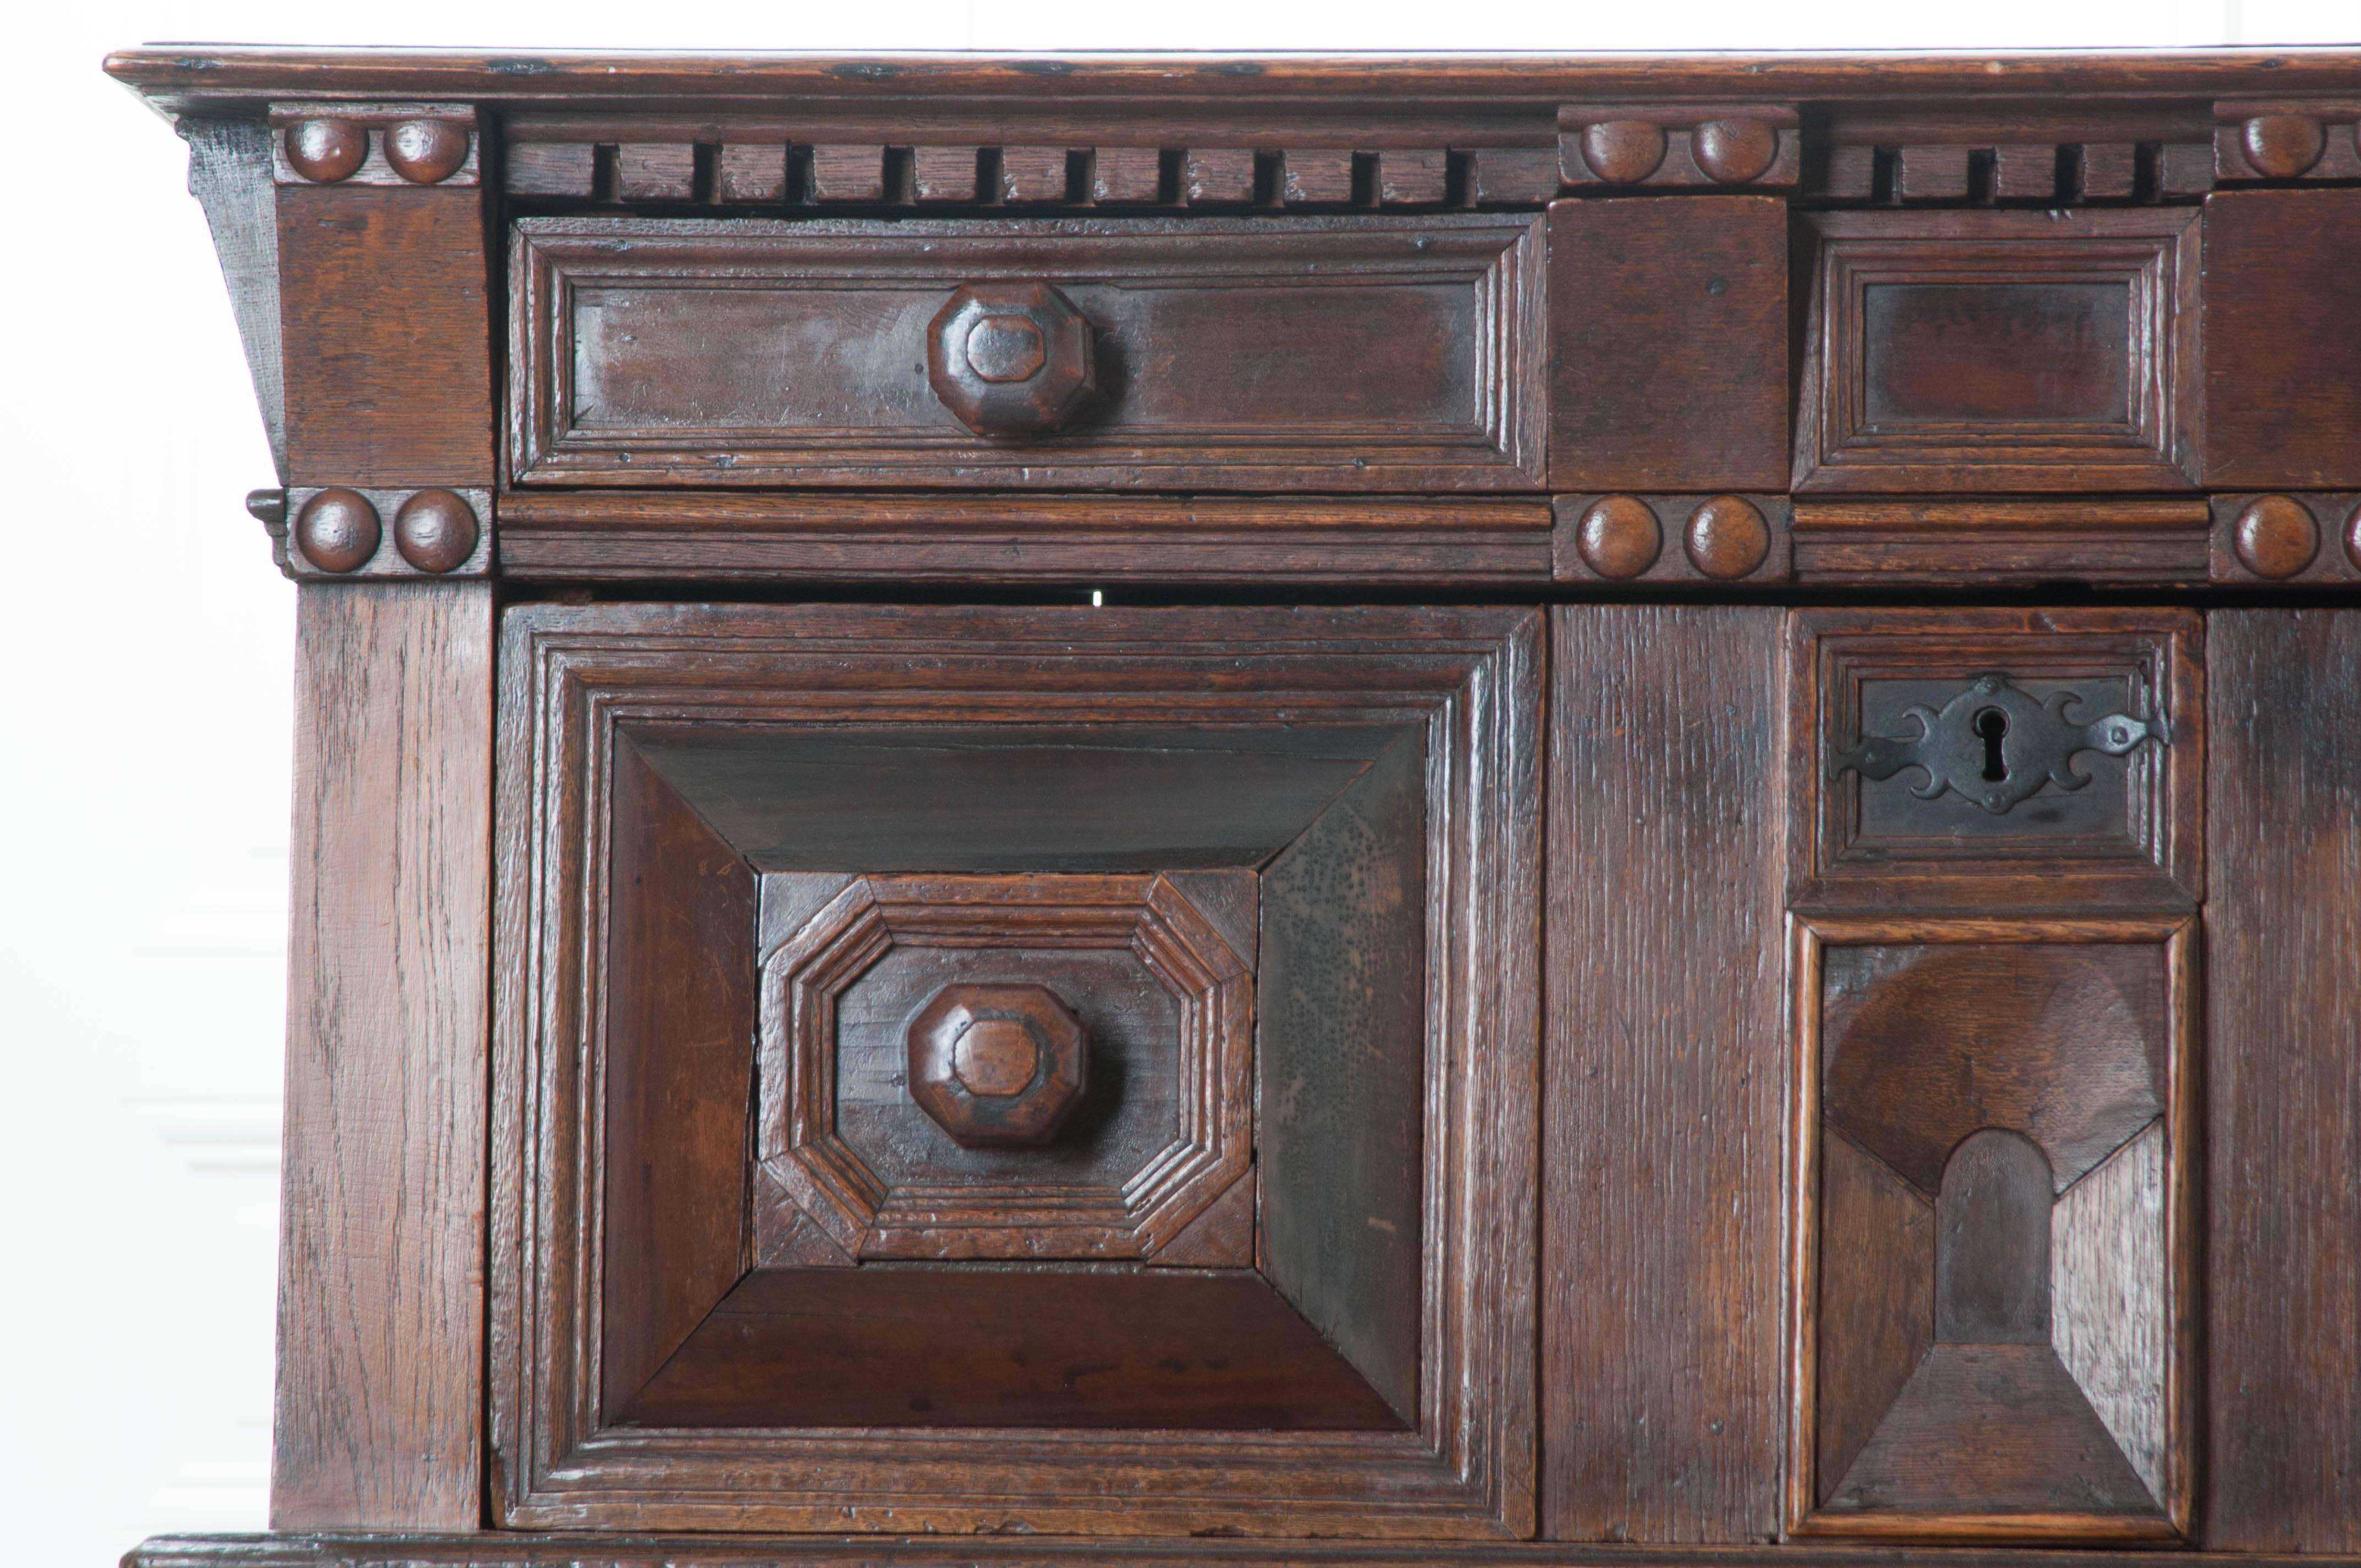 An extraordinary oak chest of drawers from the mid-17th century, England. Remarkable craftsmanship was employed when making this amazing piece. Wonderfully carved details can be found all-over this antique chest. Above the top two drawers are carved